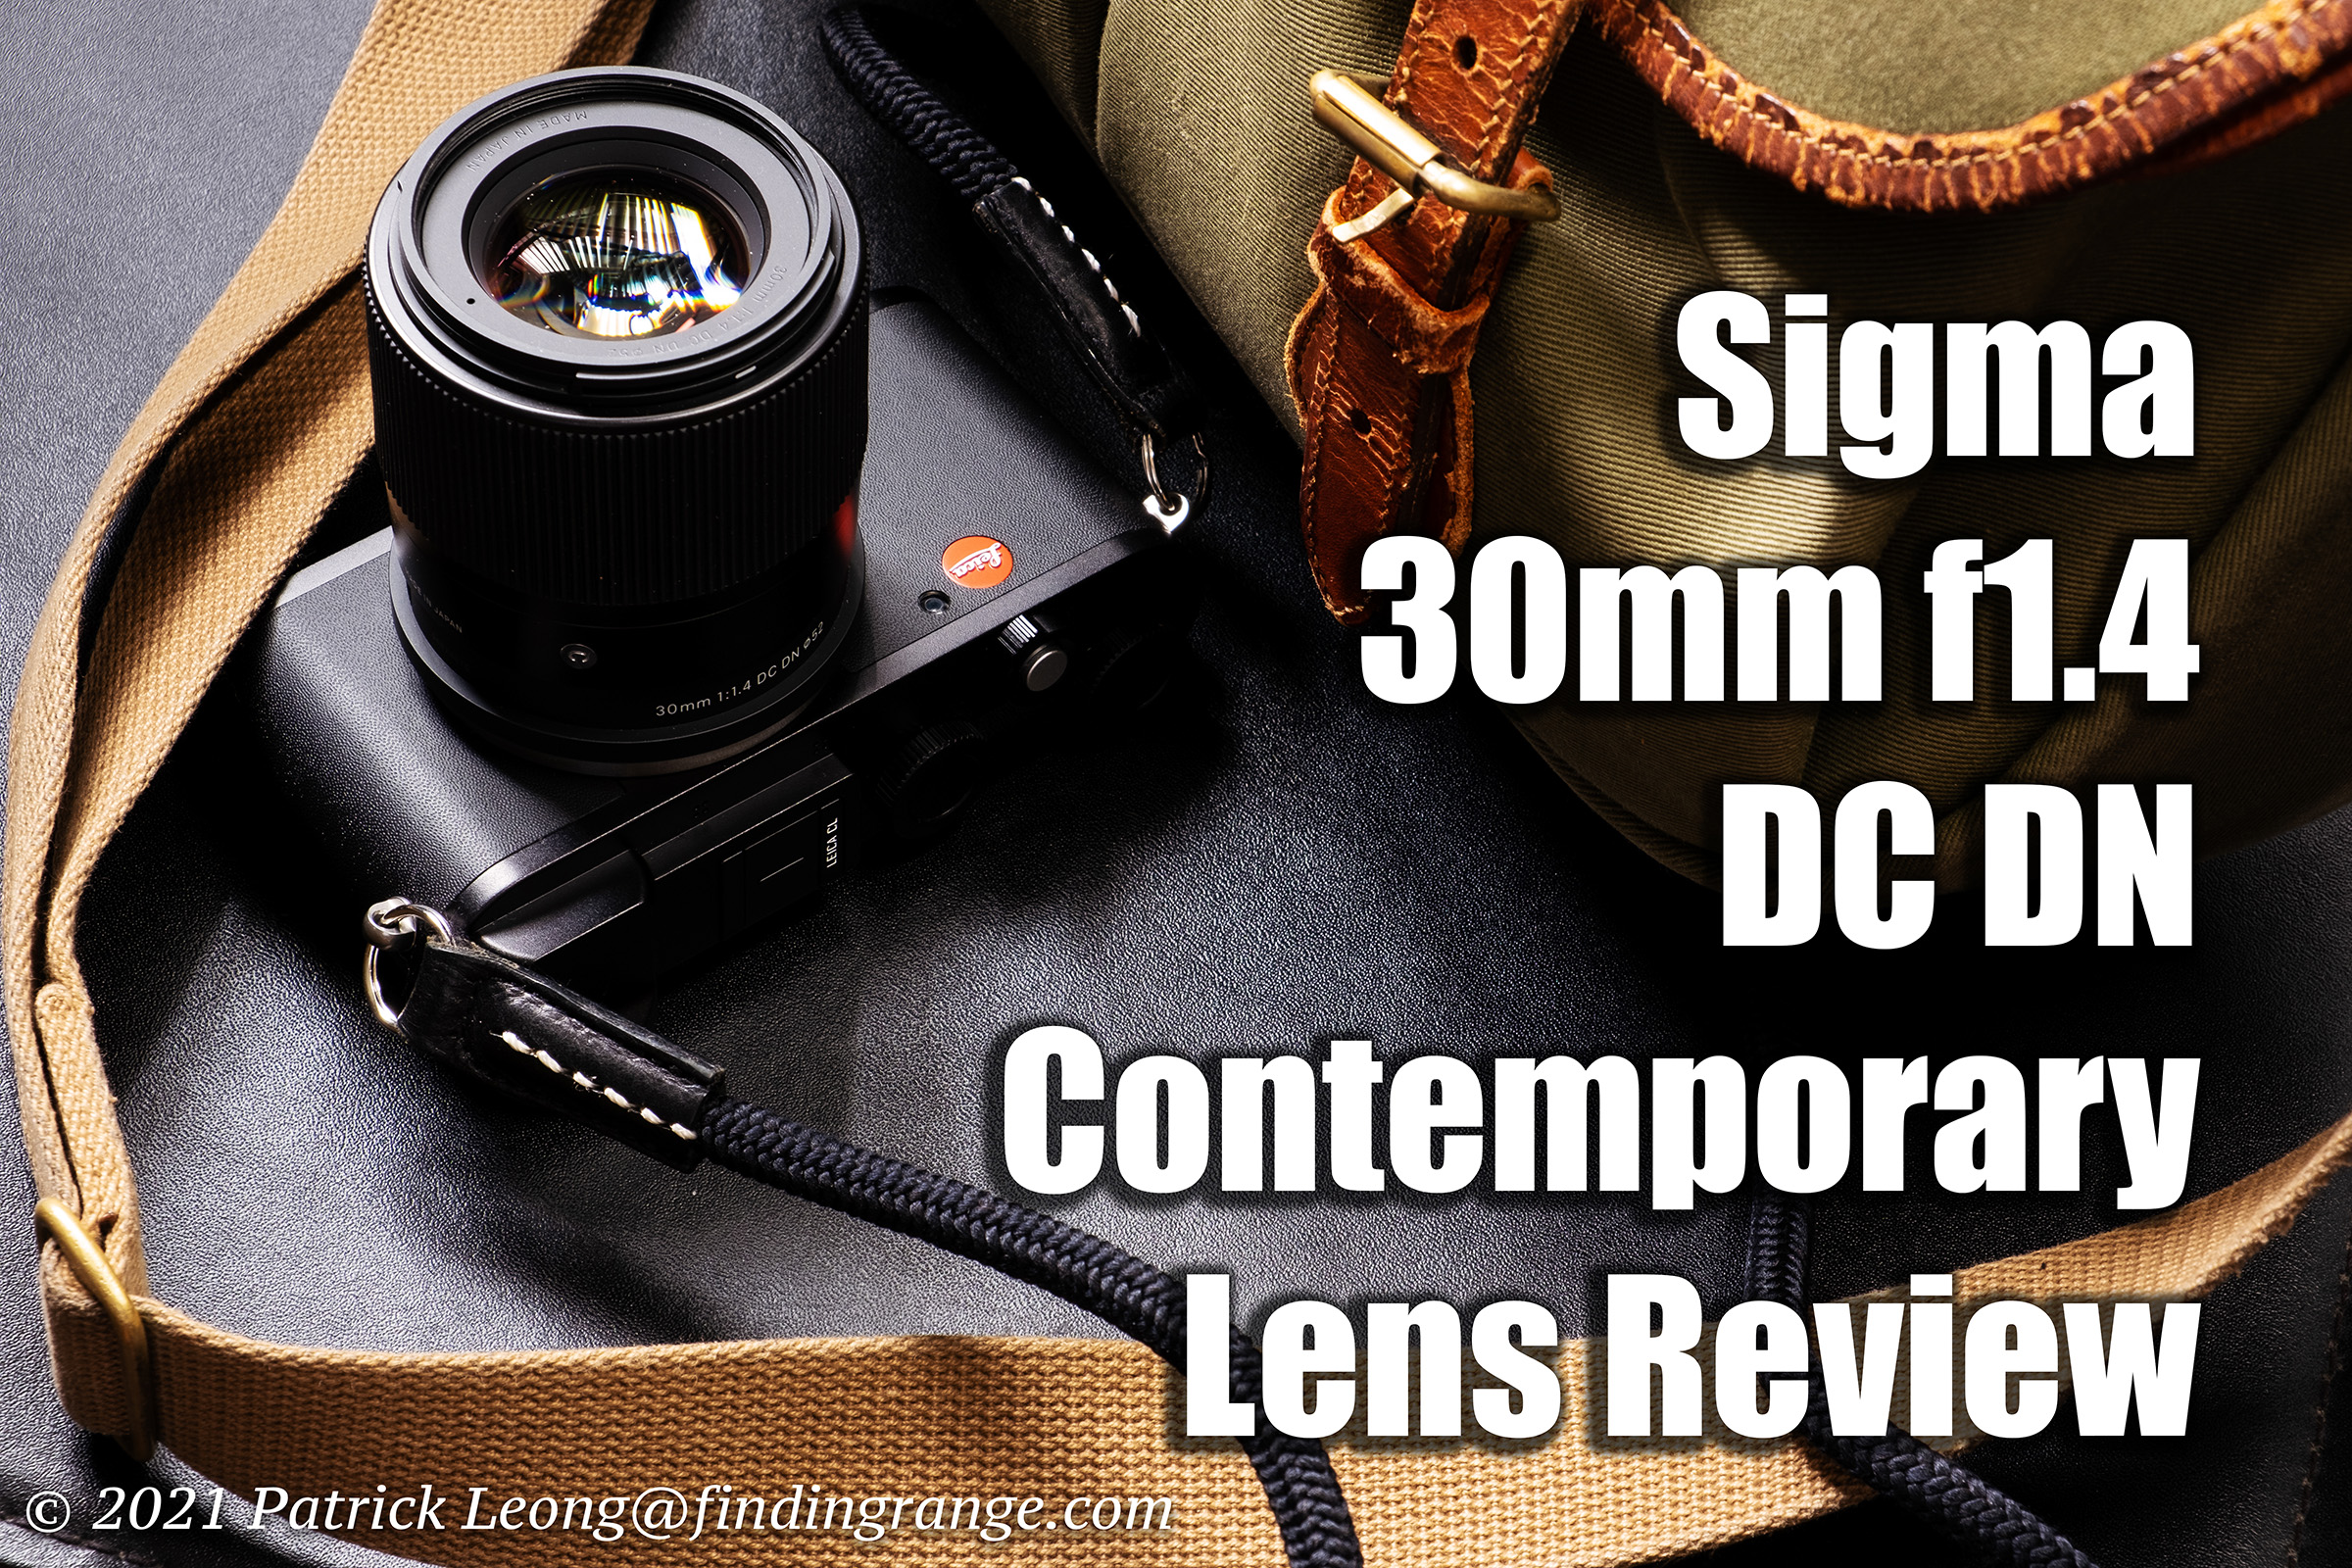 Review: Sigma 30mm f/1.4 DC DN (Sony E-Mount) - Admiring Light